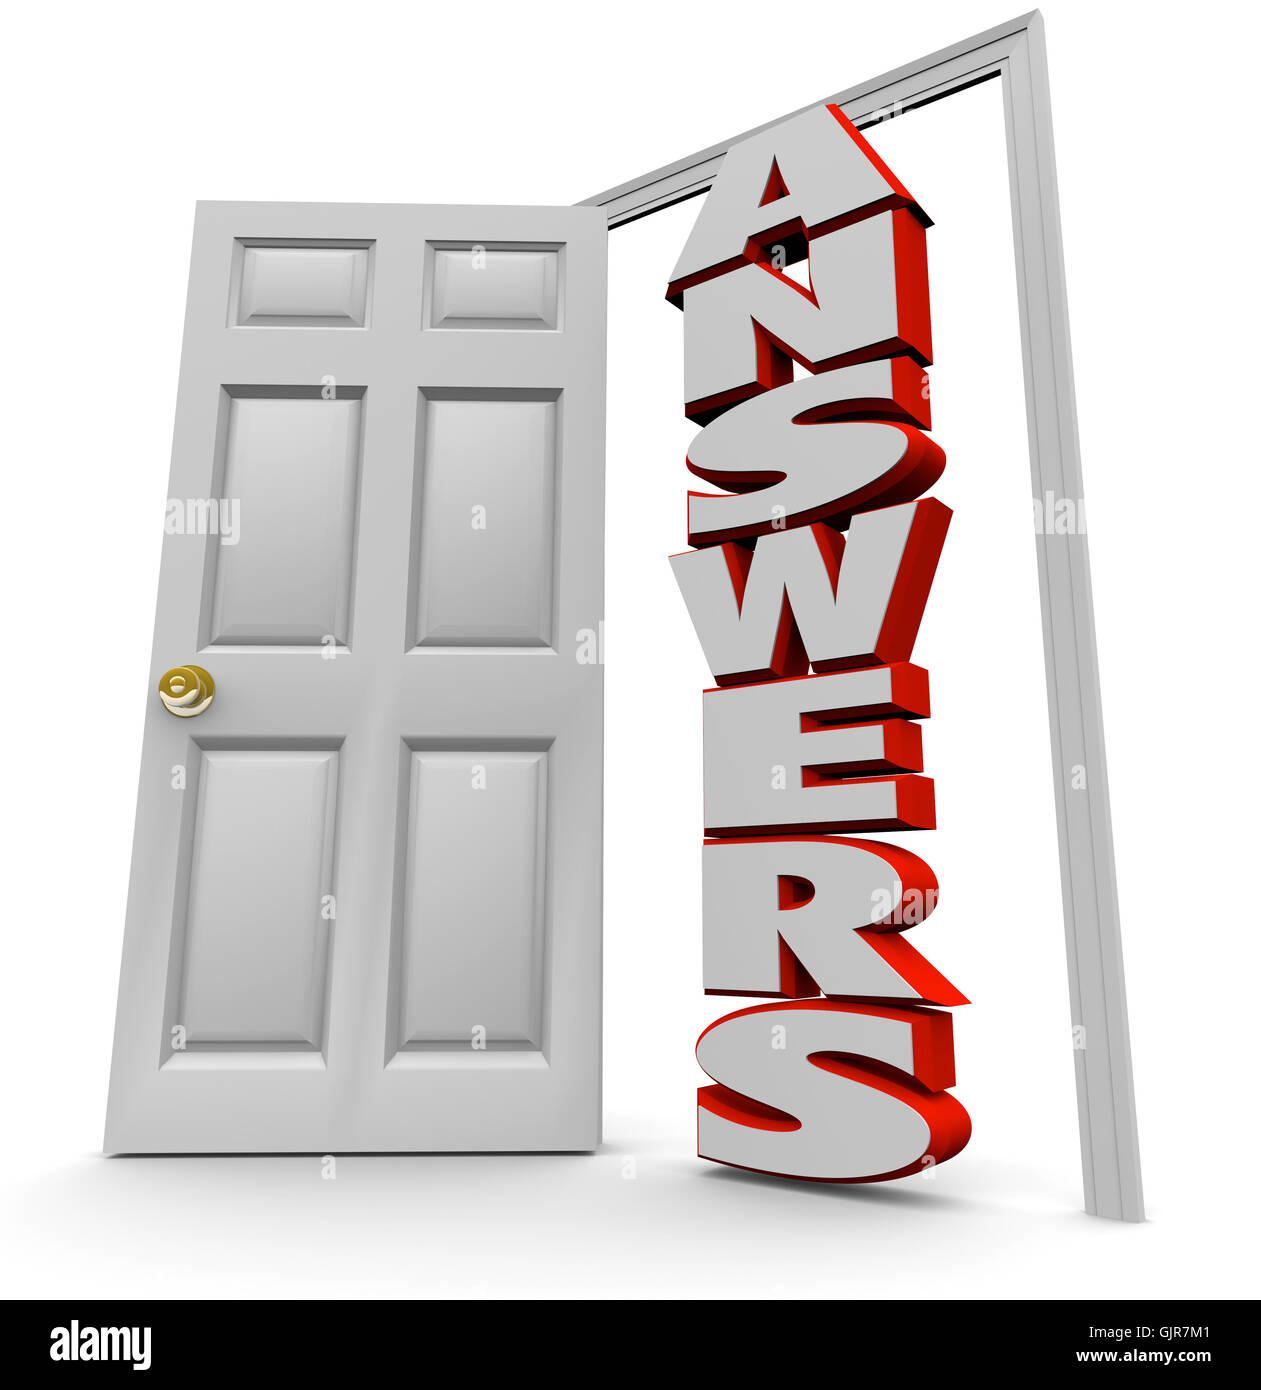 Doorway to Answers - Open Door to Answer Questions Stock Photo